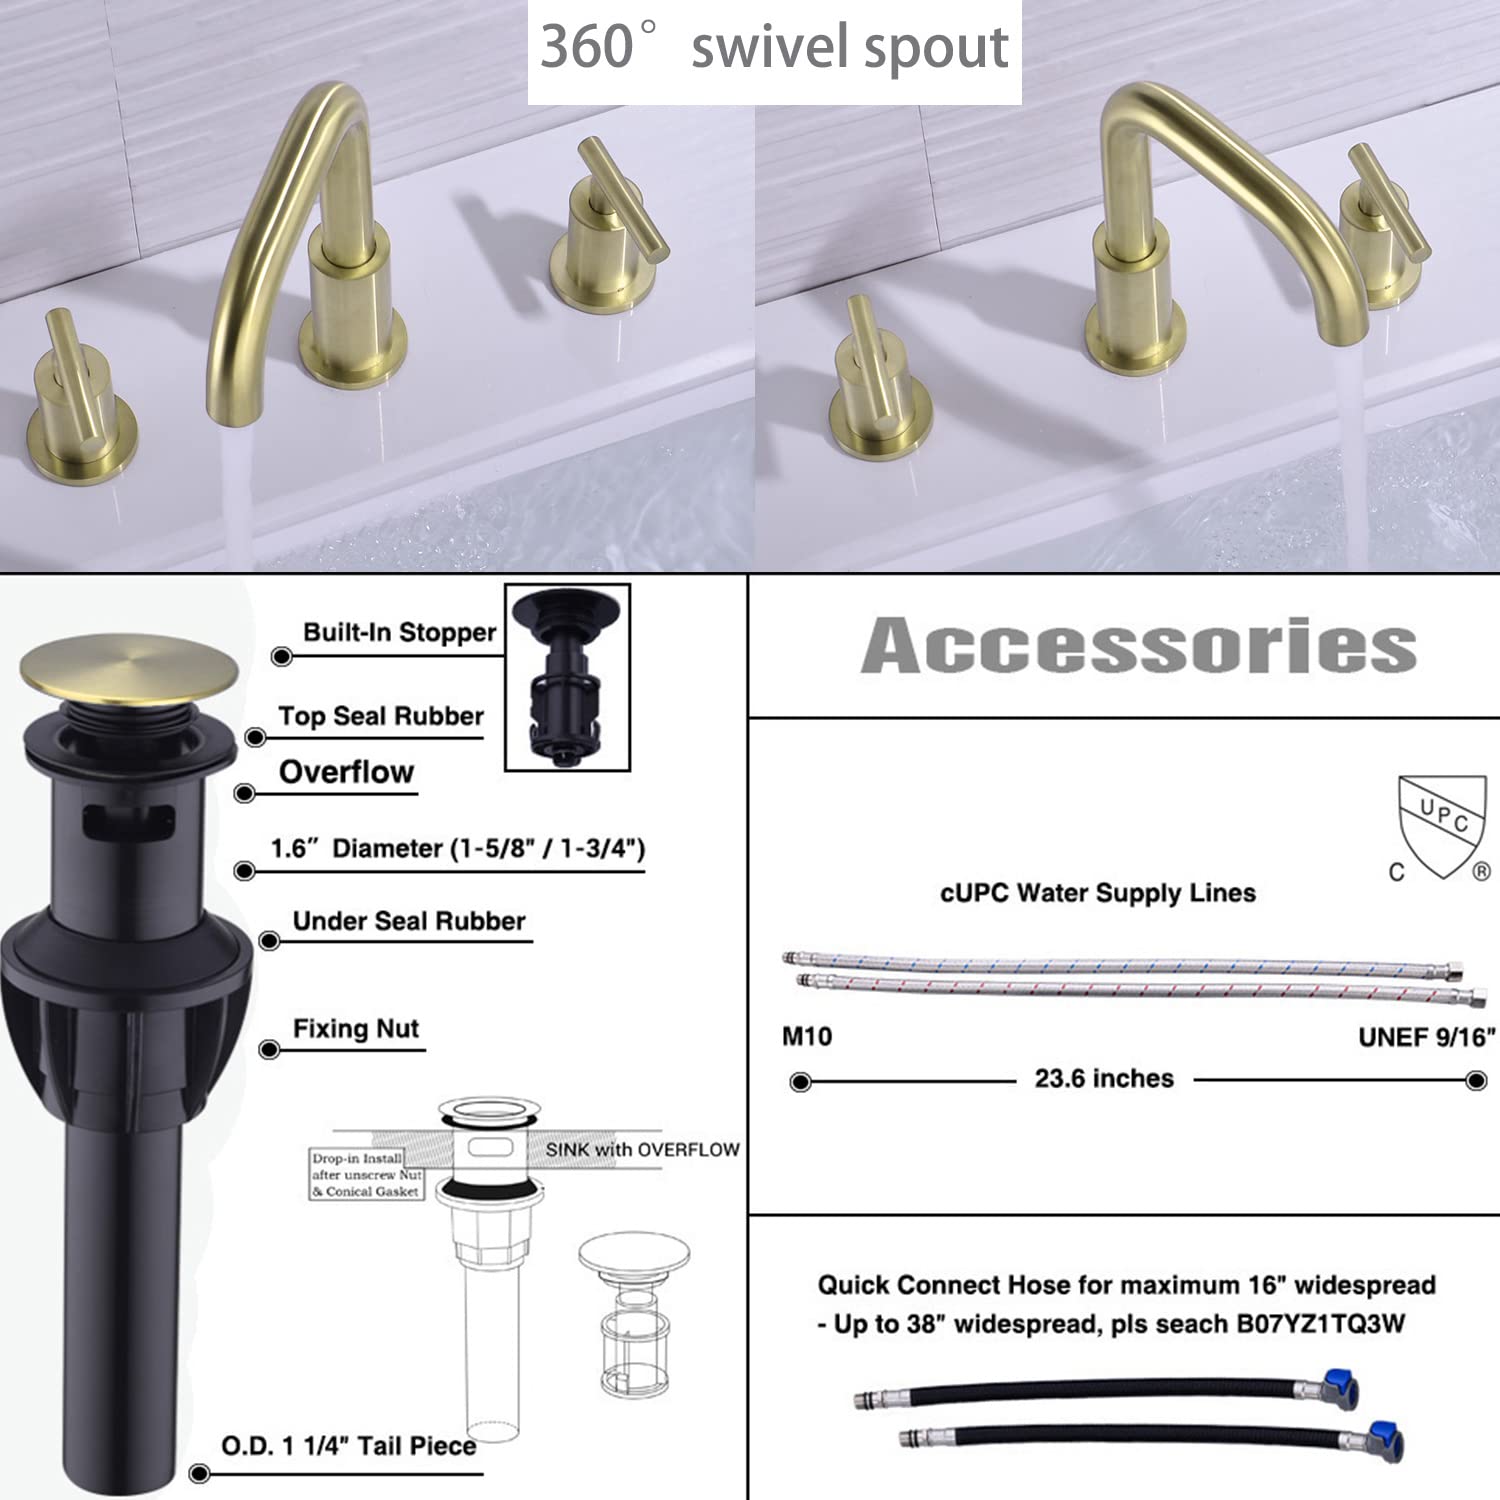 TRUSTMI Bathroom Faucet 2 Handle 8 Inch Brass Sink Faucet 3 Hole Widespread with 360 Degree Swivel Spout, cUPC Water Supply Lines and Overflow Pop Up Drain Included, Brushed Gold